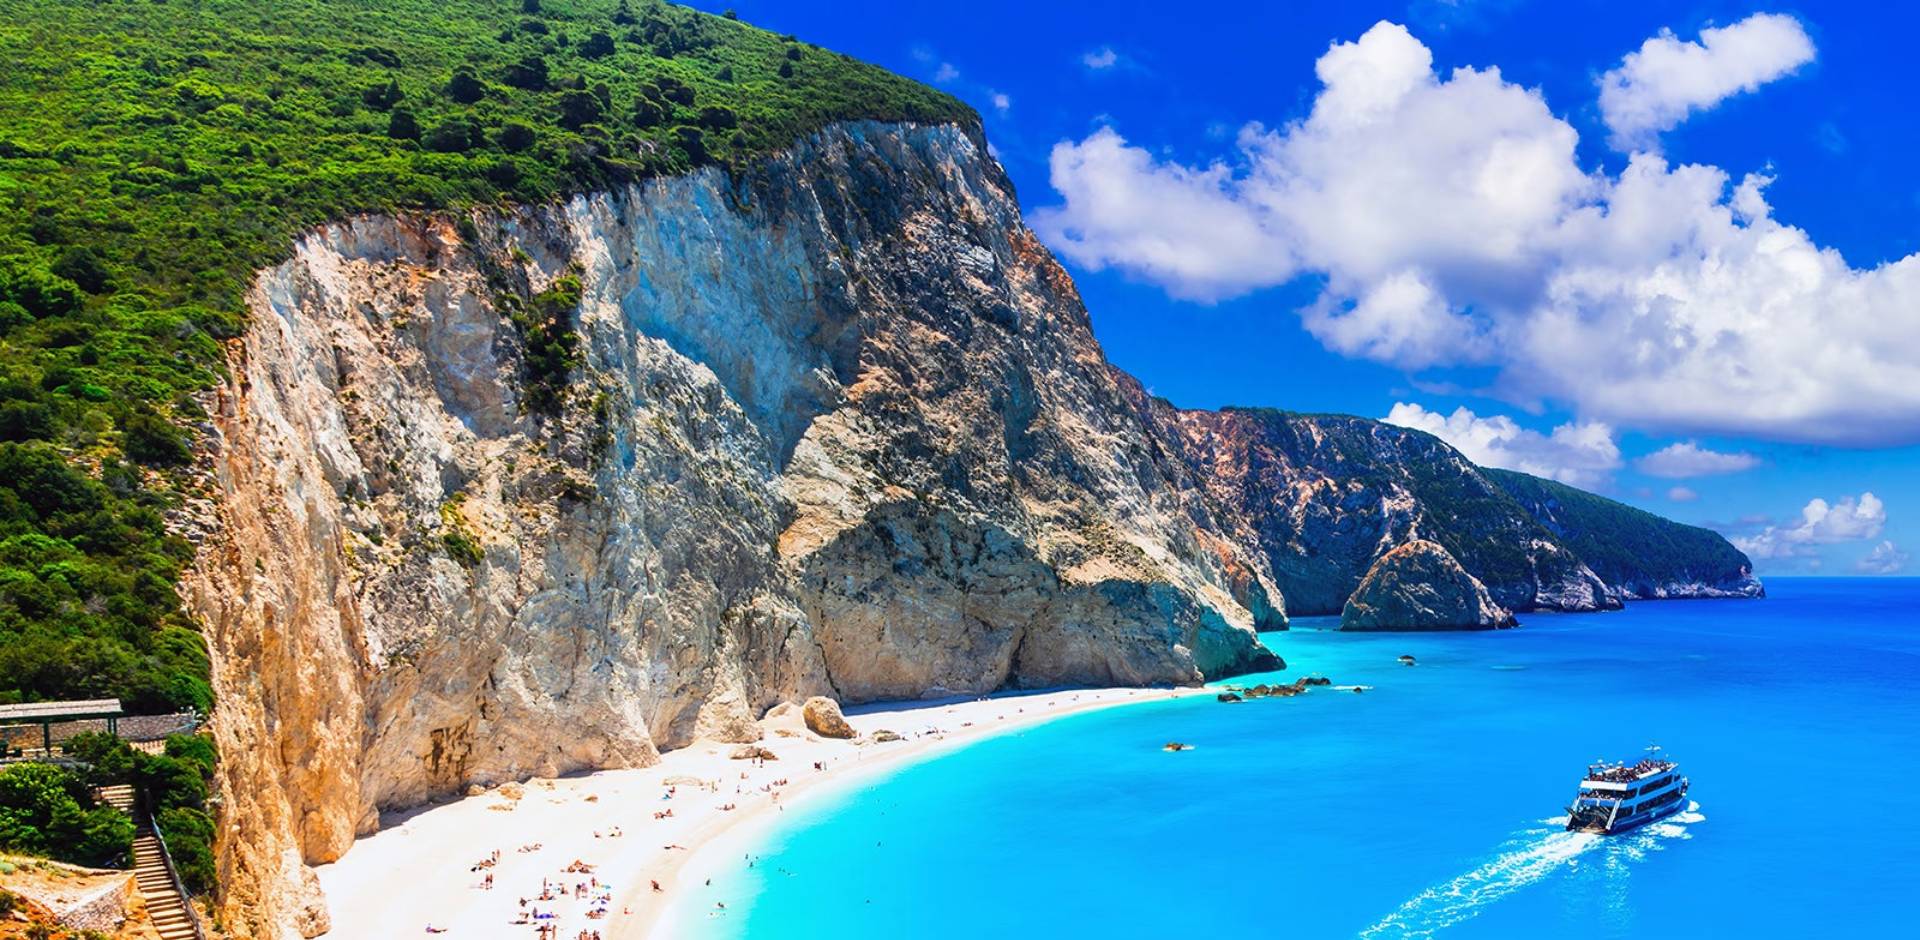 Discover the crystal clear waters of Lefkada Island. Our complete travel guide